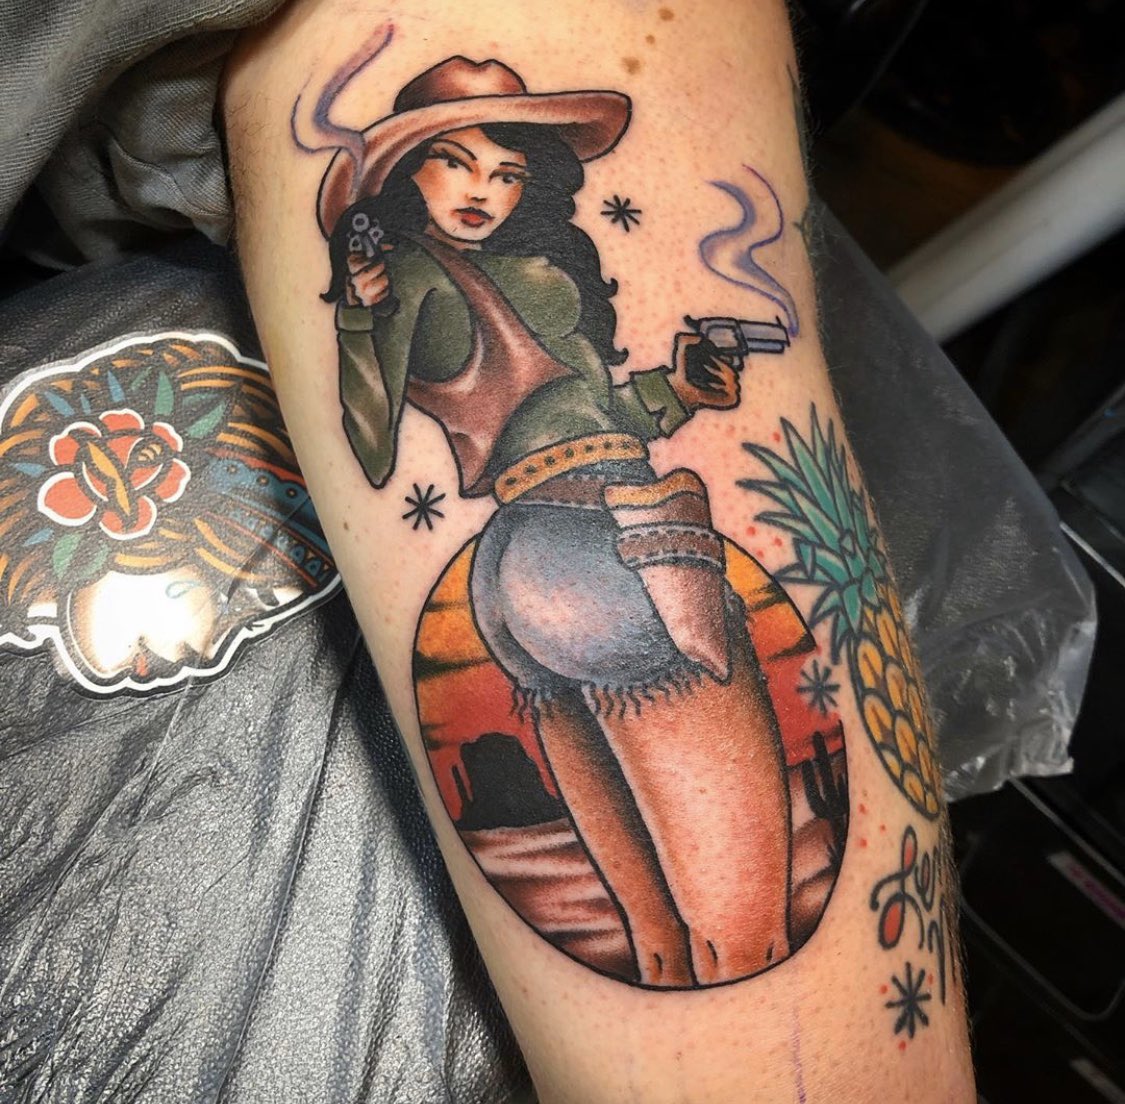 Cowboys  Cowgirls Authentic Rodeo Tatooo Flash by Norman Collins aka  Sailor Jerry Prints  Piddix  AllPosterscom  Cowgirl tattoos Cowboy  tattoos Western tattoos